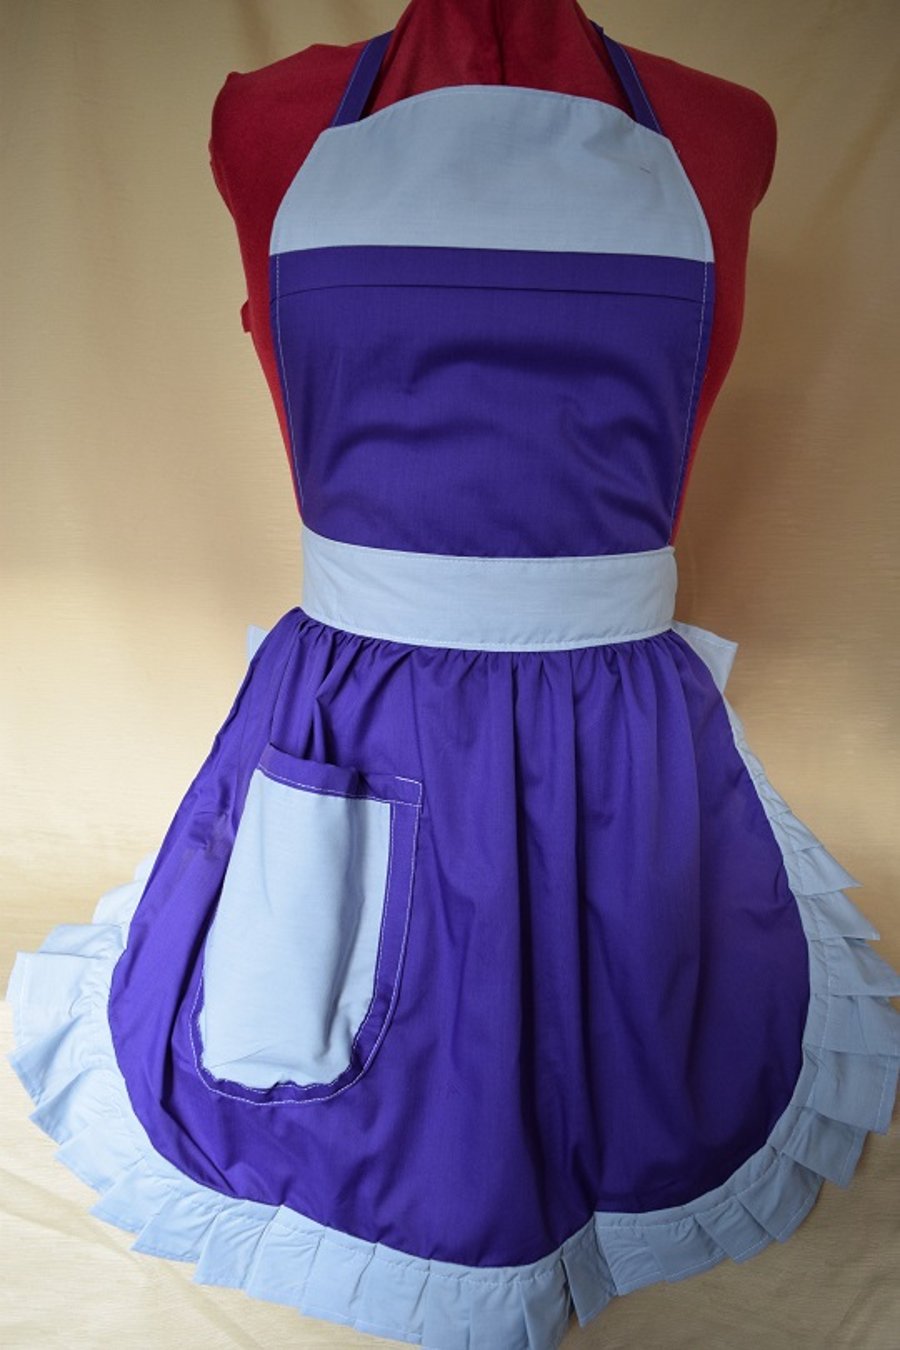 Vintage 50s Style Full Apron Pinny - Purple with Silver Grey Trim